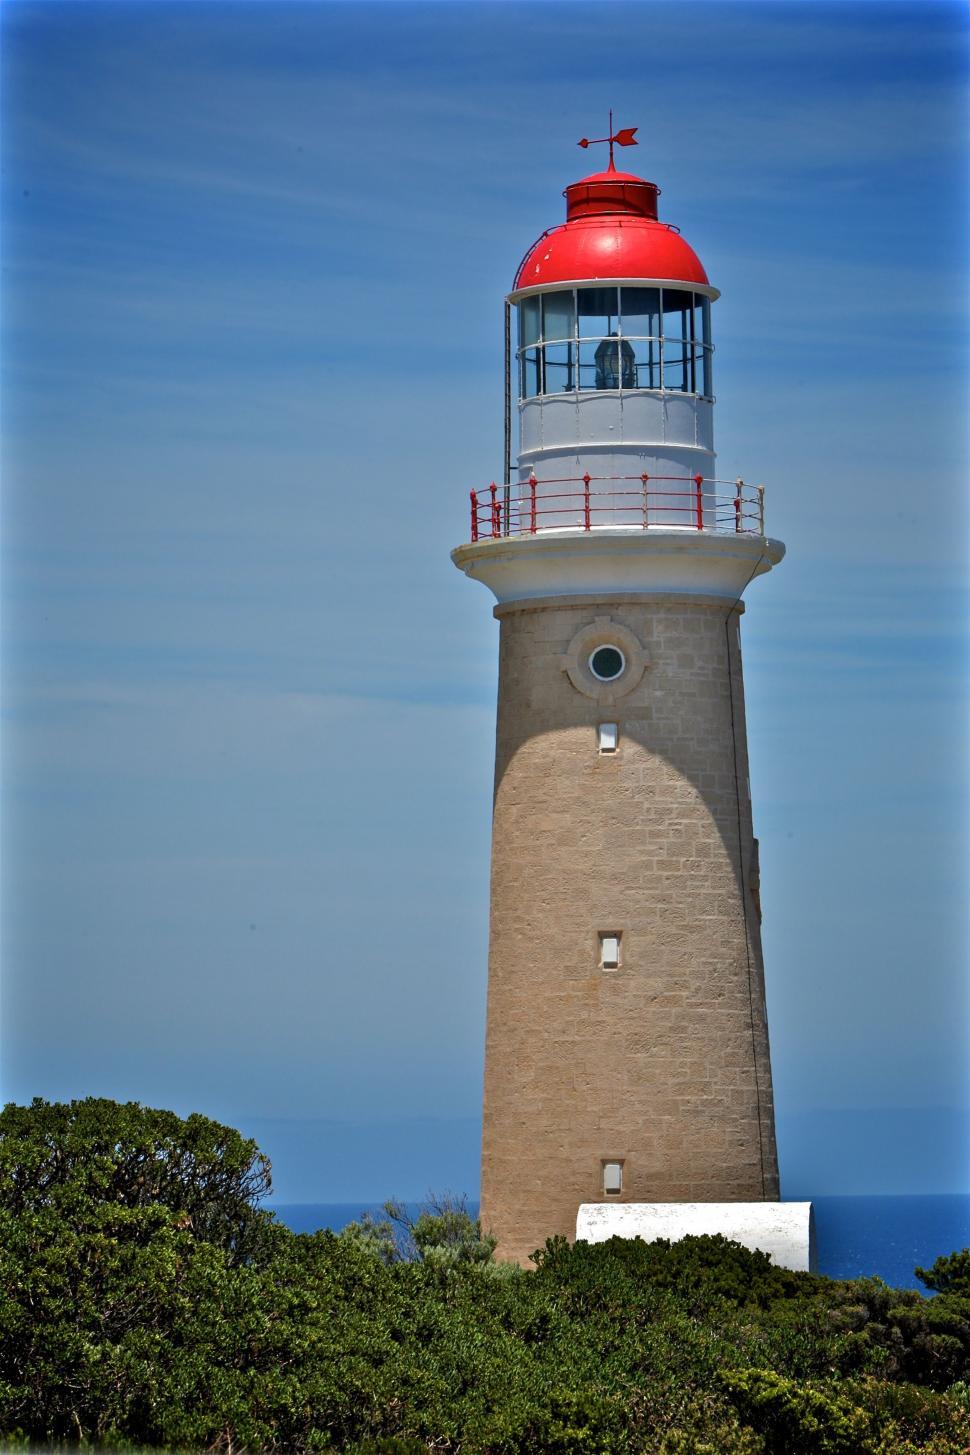 Free Image of Lighthouse and Sky  